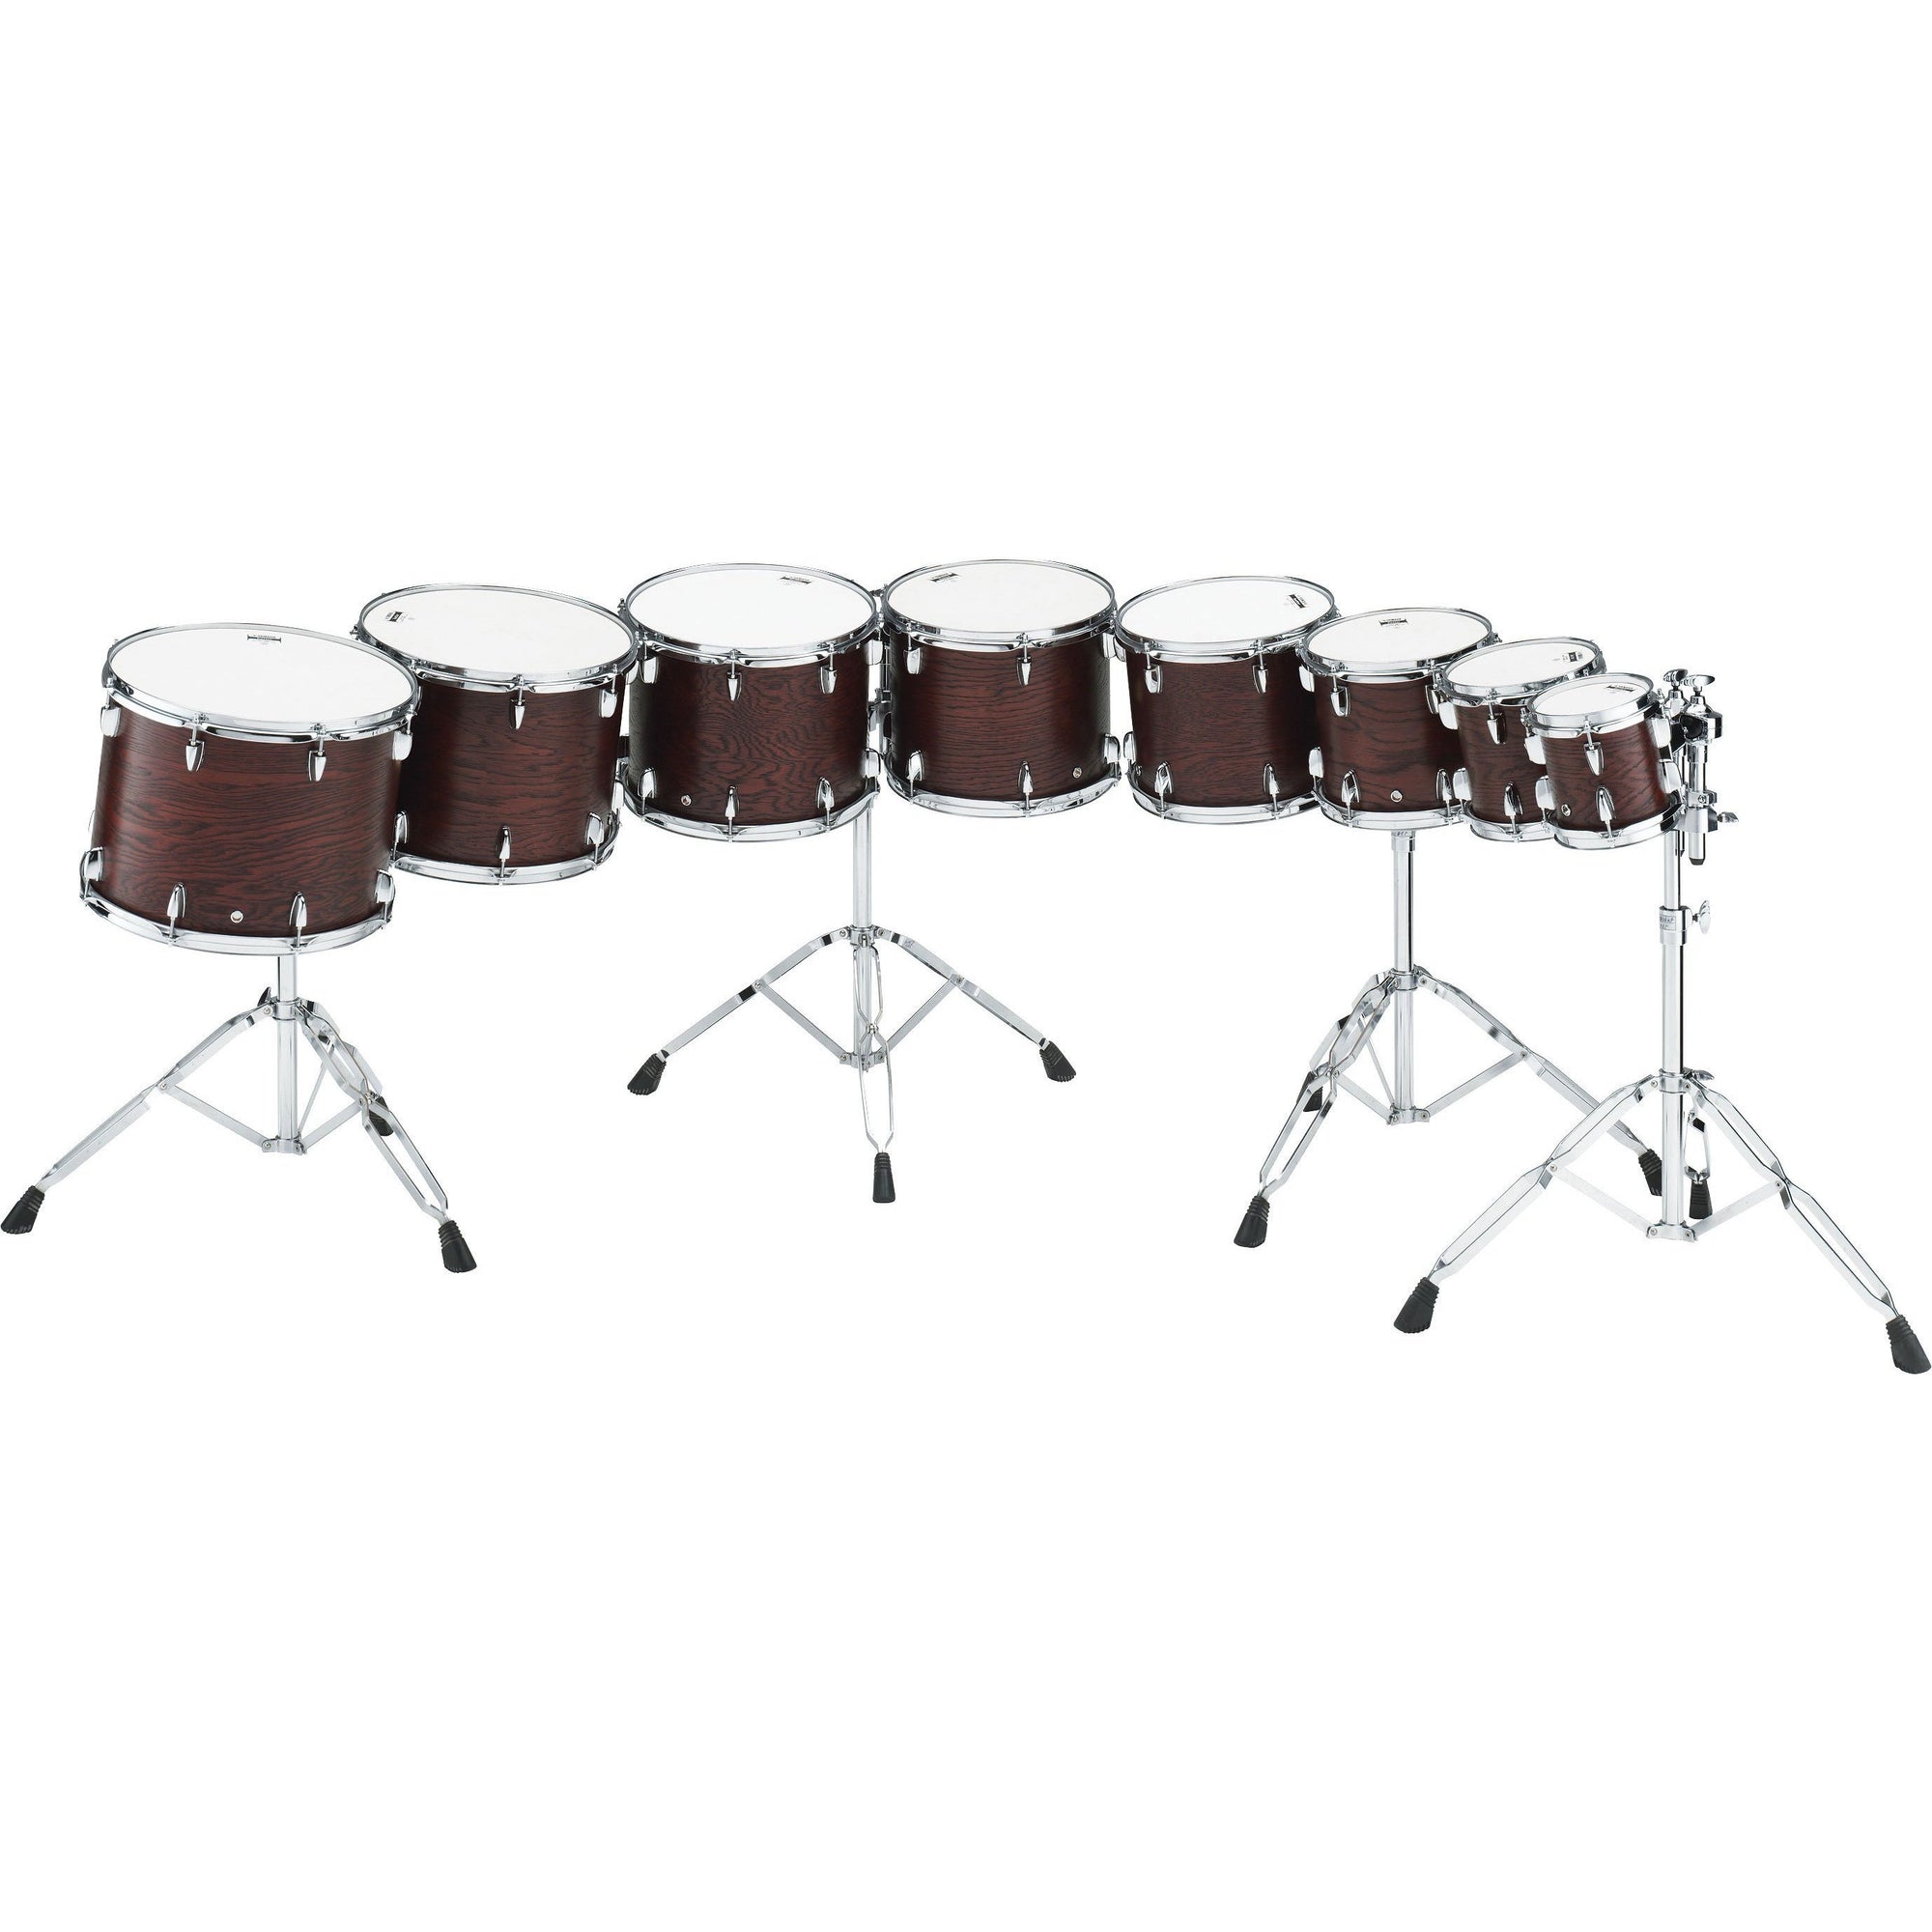 Yamaha - CT-9000 Series - Double-Headed Tom Toms with Oak Shell-Percussion-Yamaha-Music Elements